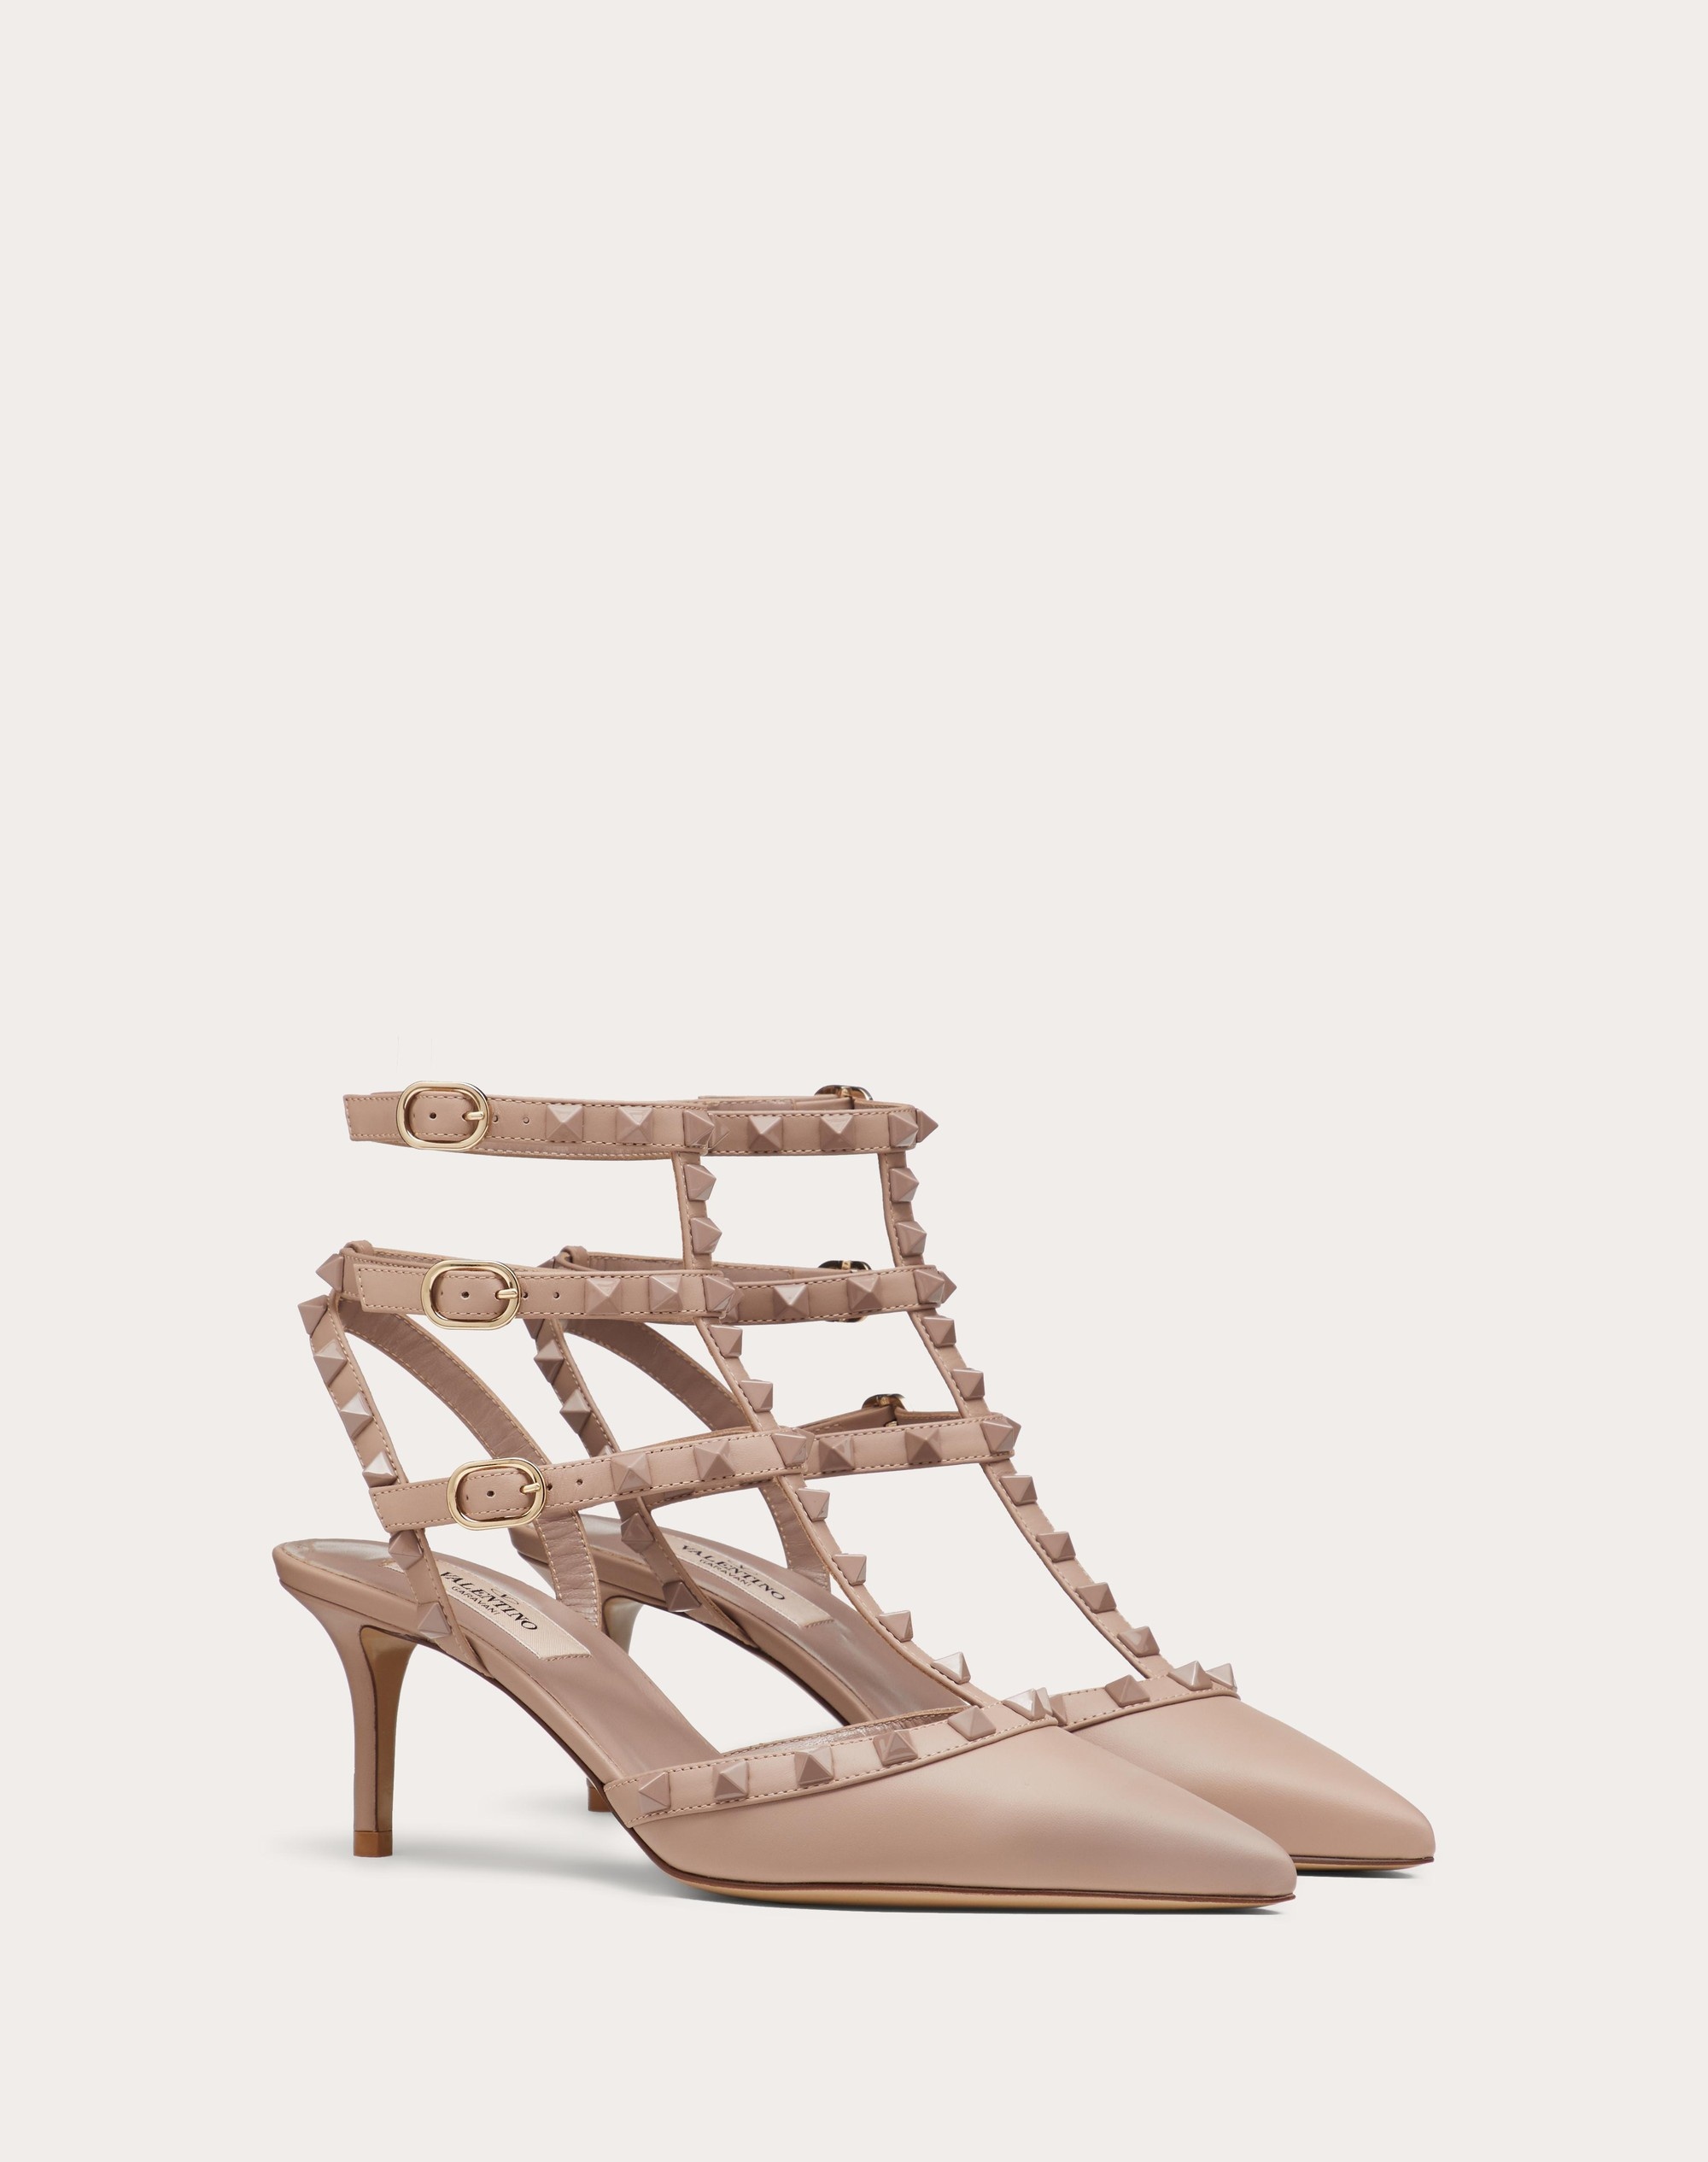 ROCKSTUD ANKLE STRAP PUMP WITH TONAL STUDS 65 MM - 2